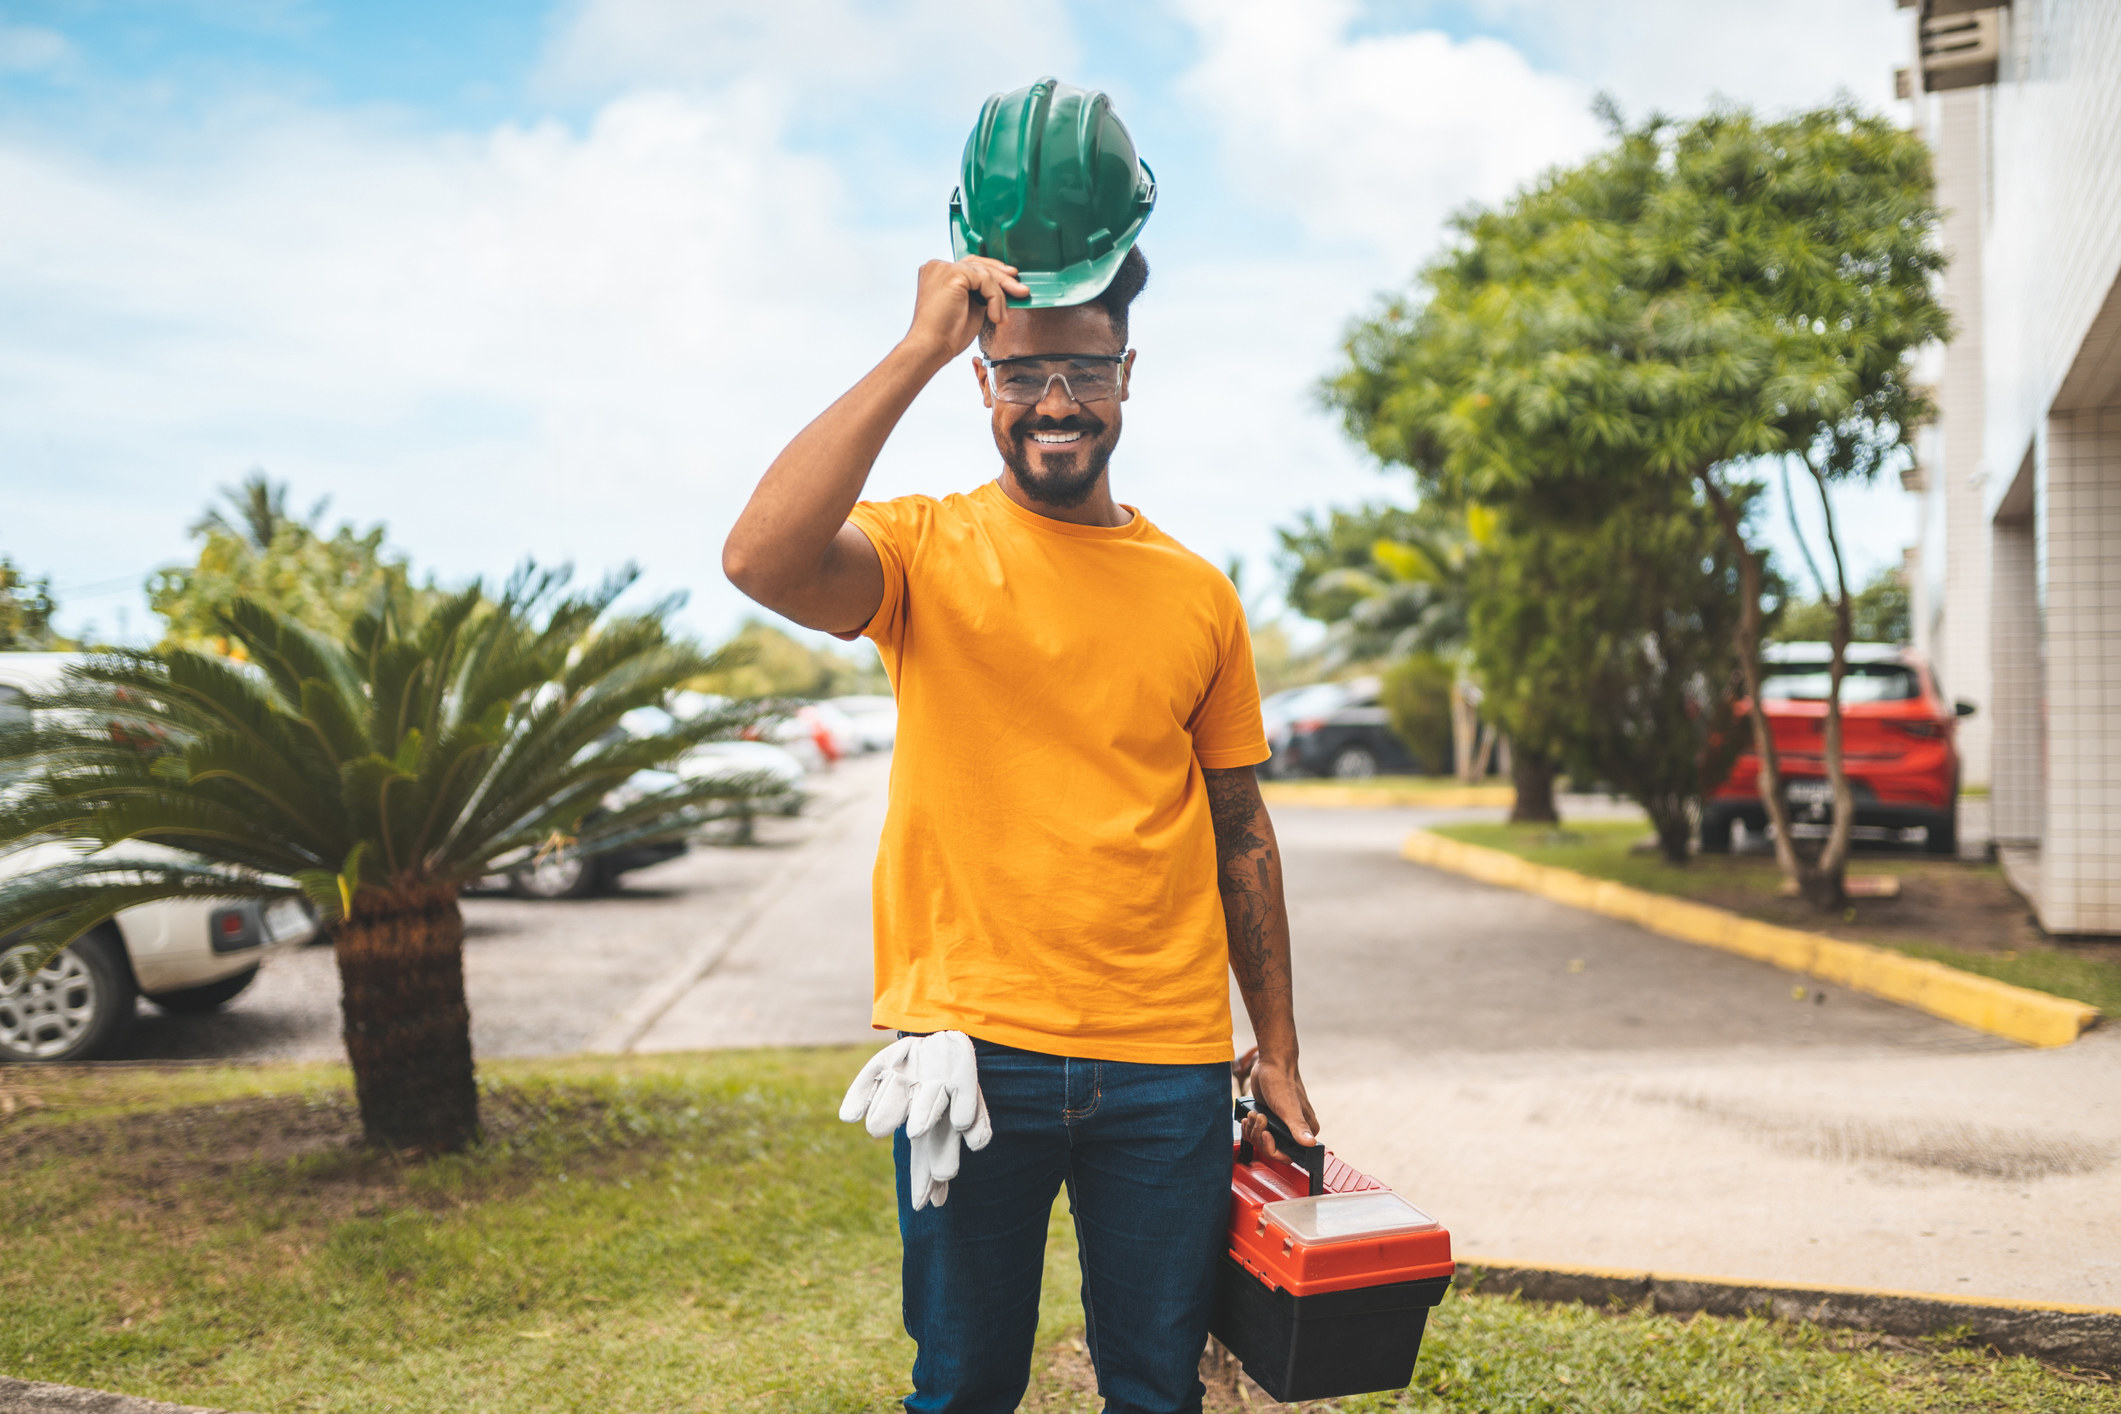 A contractor tips his hard hat toward the camera